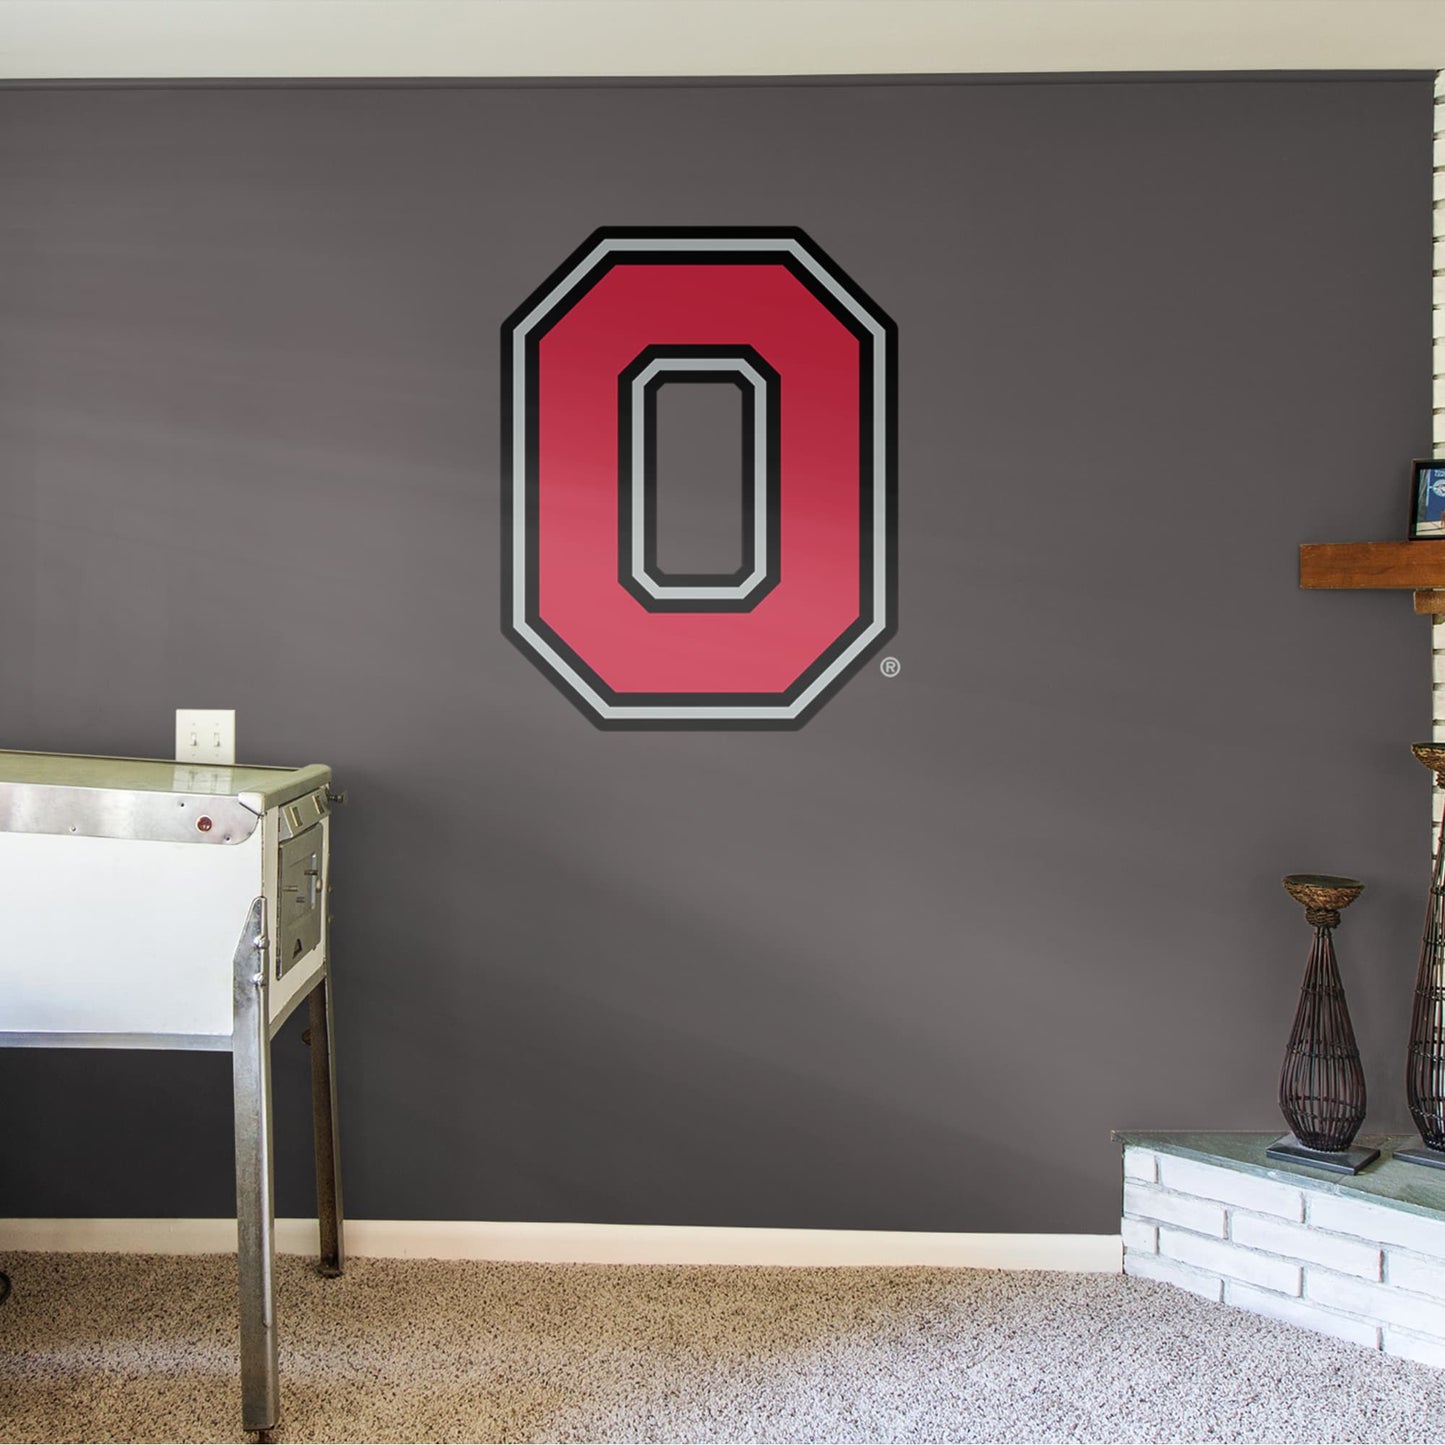 Ohio State Buckeyes: Block O Logo - Officially Licensed Removable Wall Decal